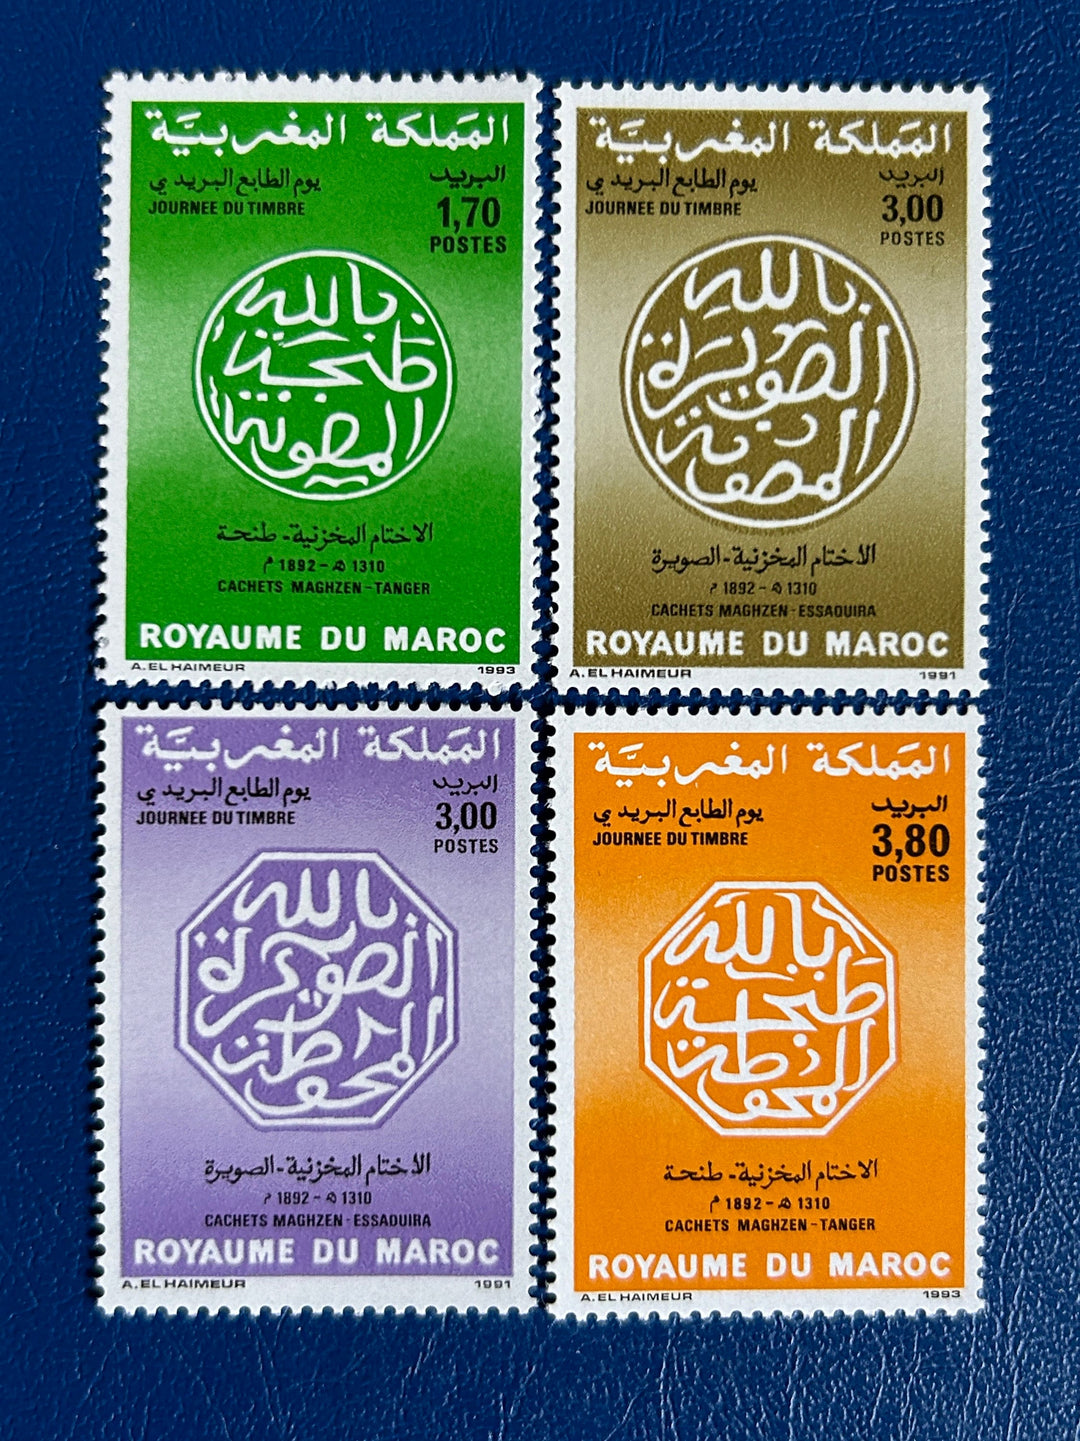 Morocco - Original Vintage Postage Stamps- 1992 - Stamp Day - for the collector or crafter